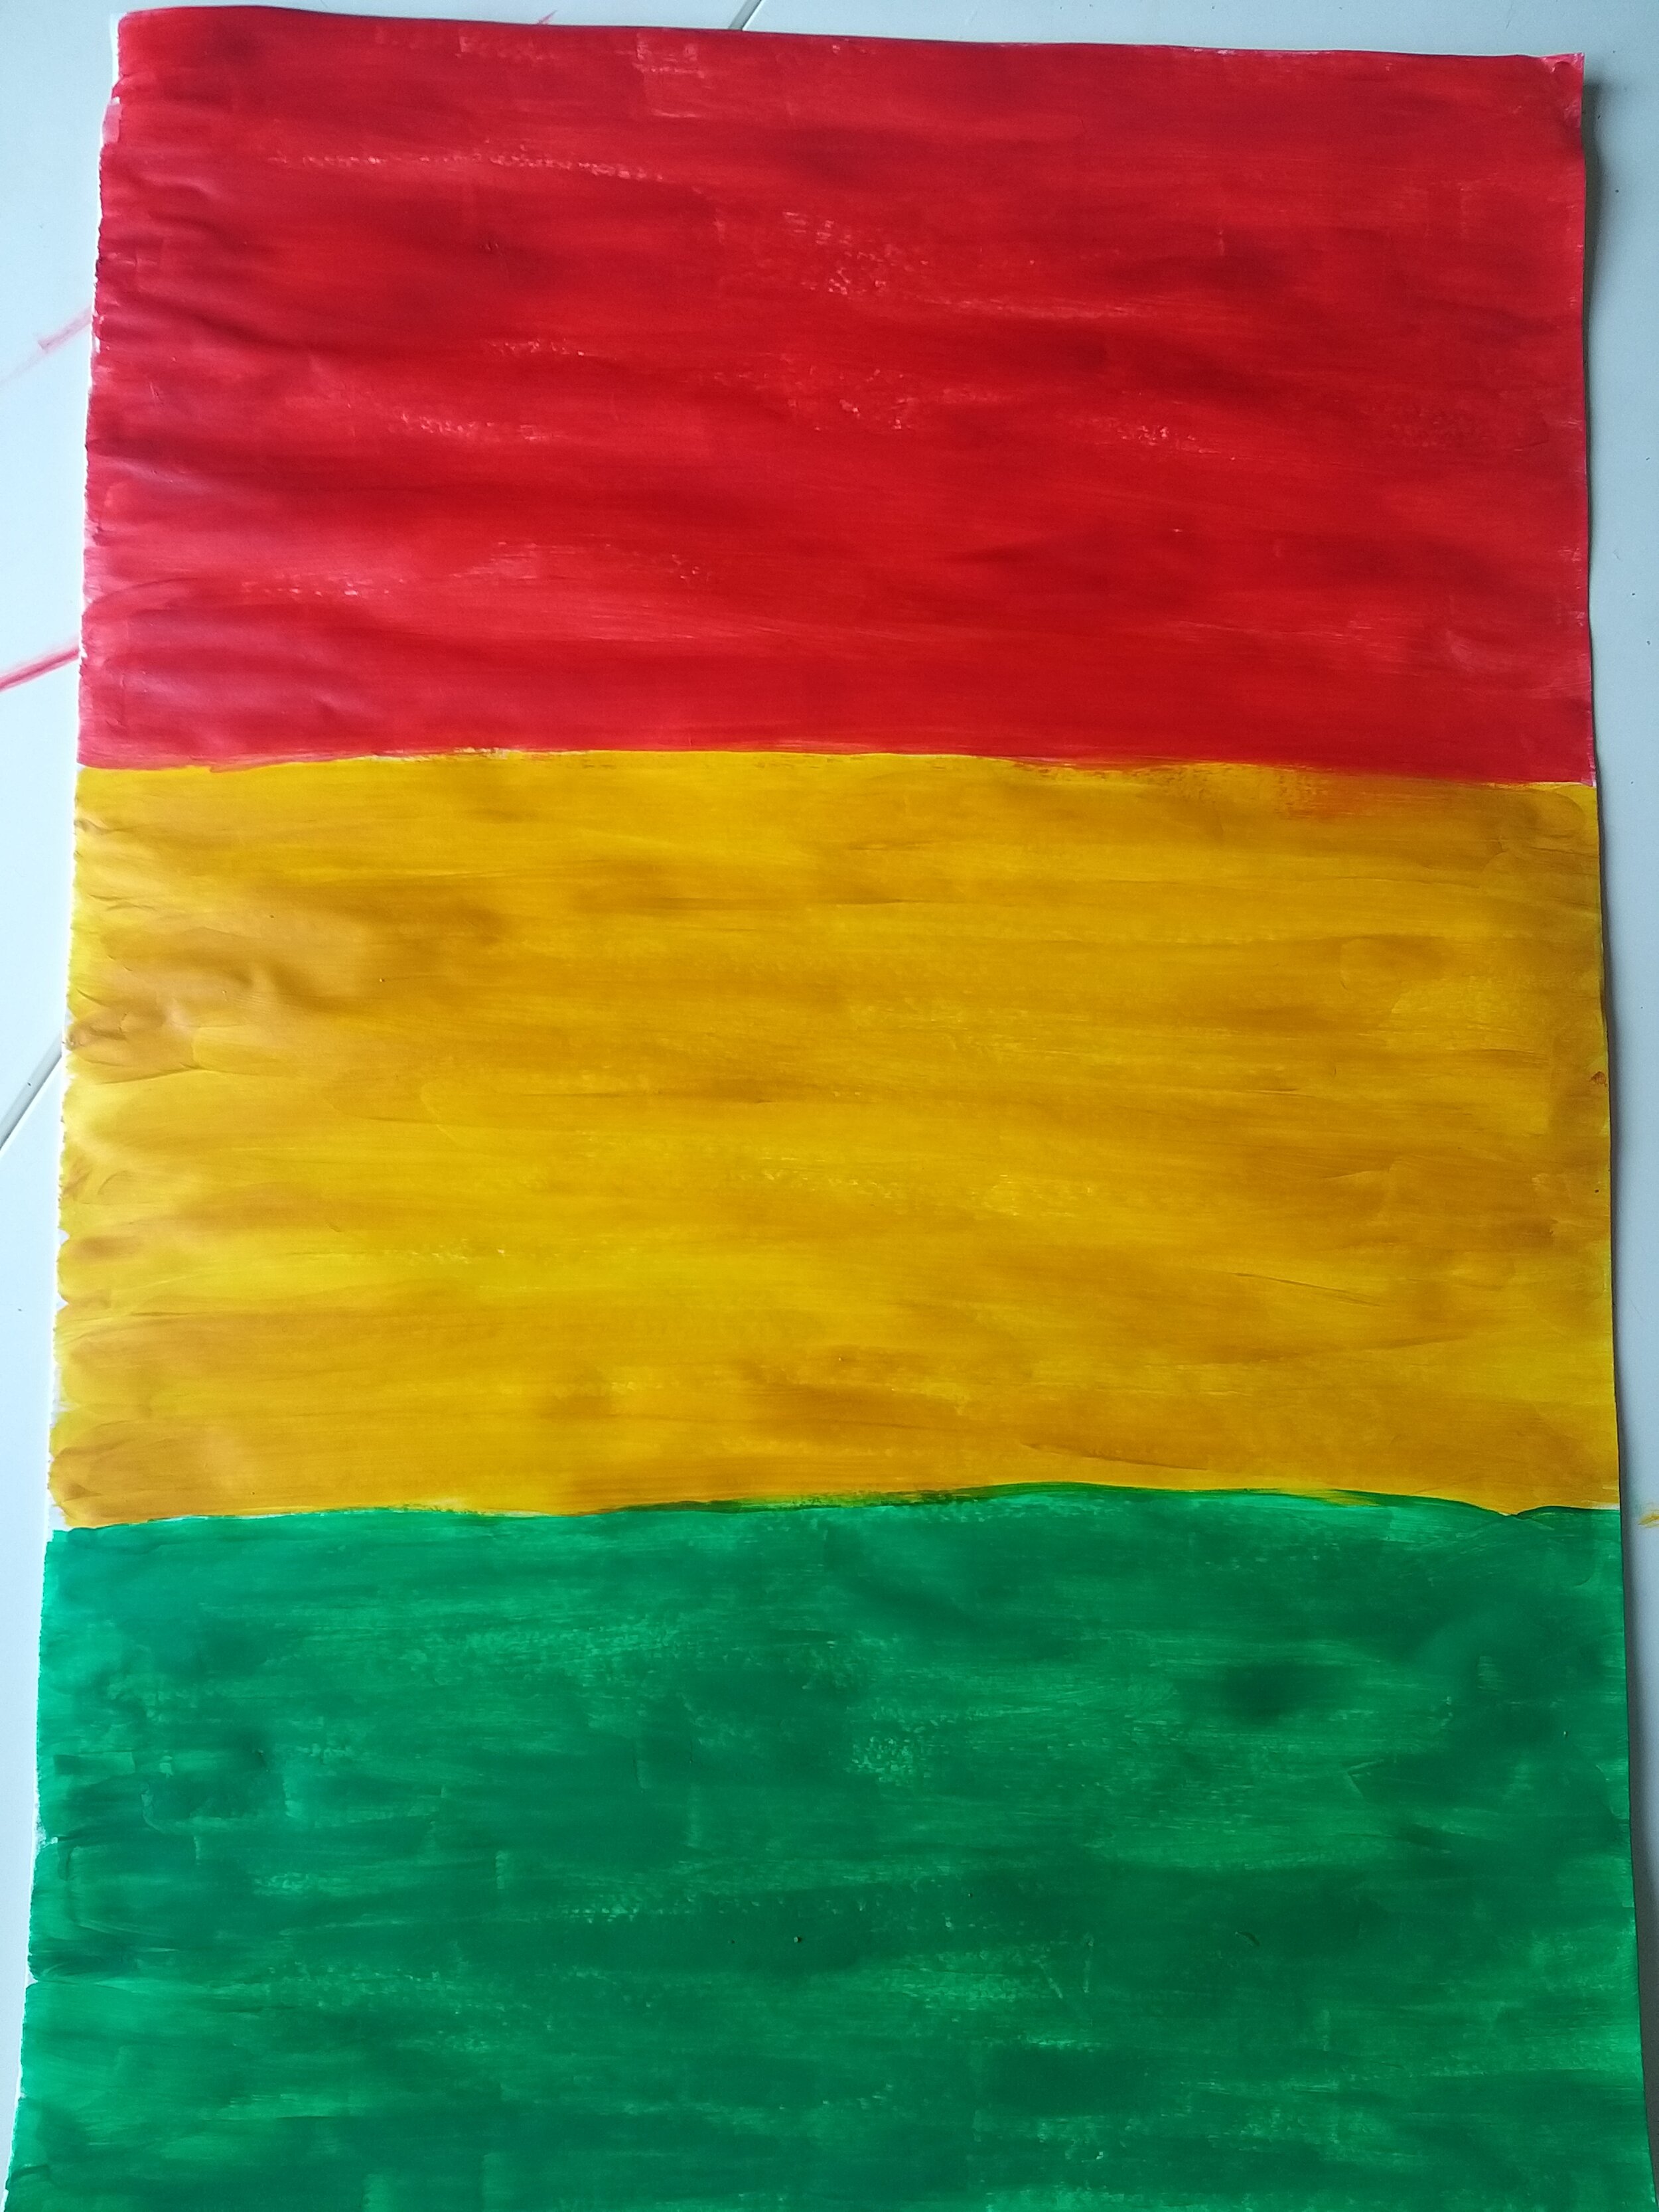 the Bolivian Flag meets the Pan African Movement